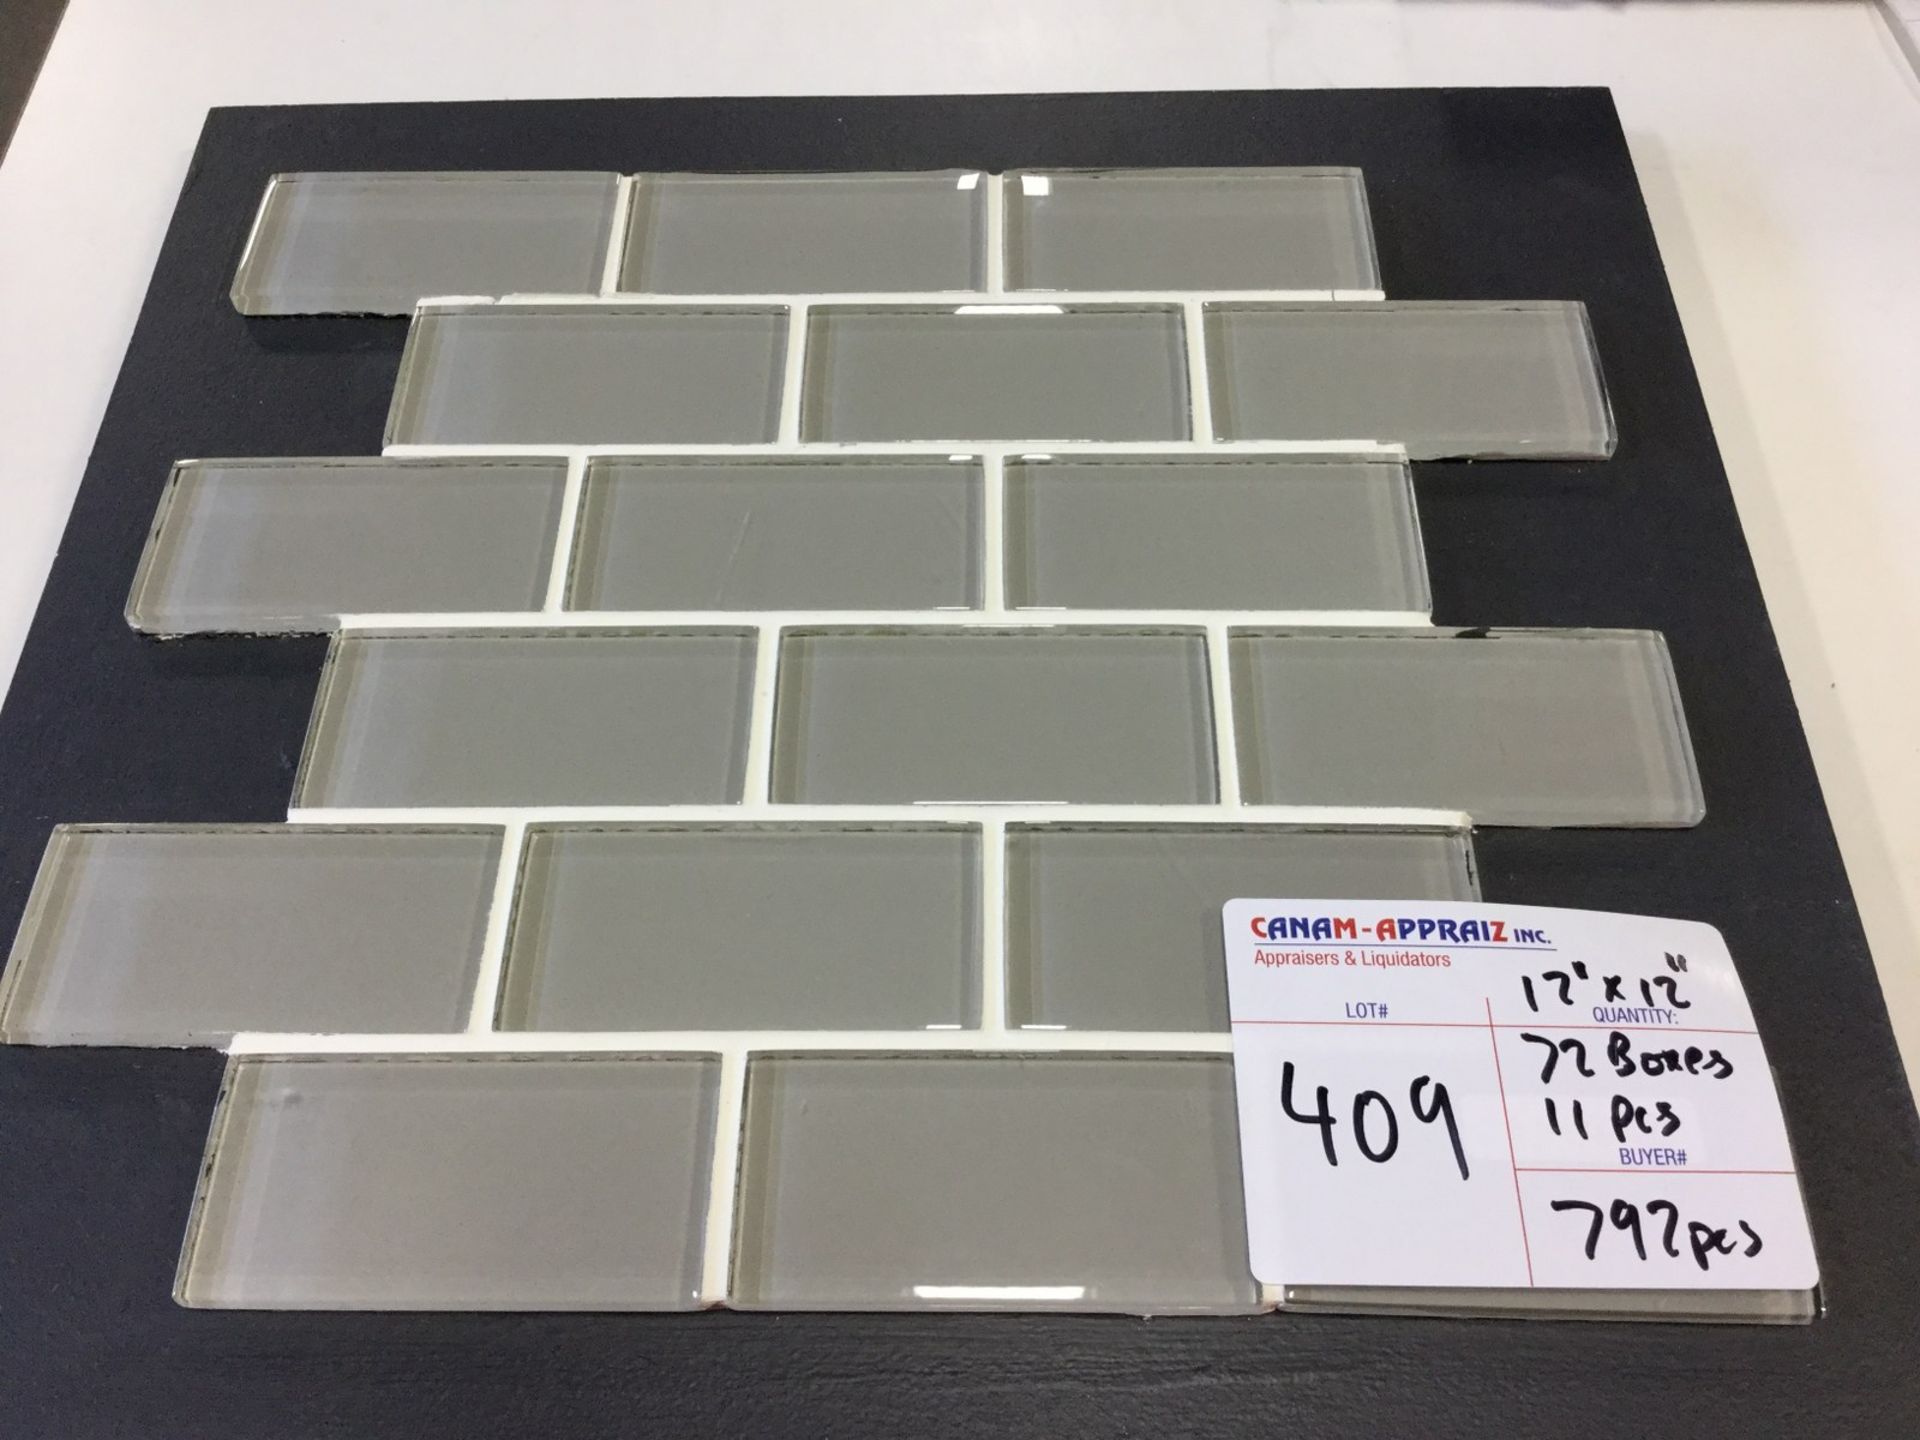 2"X4" LIGHT GREY GLASS POLISHED MOSAIC 792 PIECES OR SQ/FT, RETAIL $14.98 SQ/FT